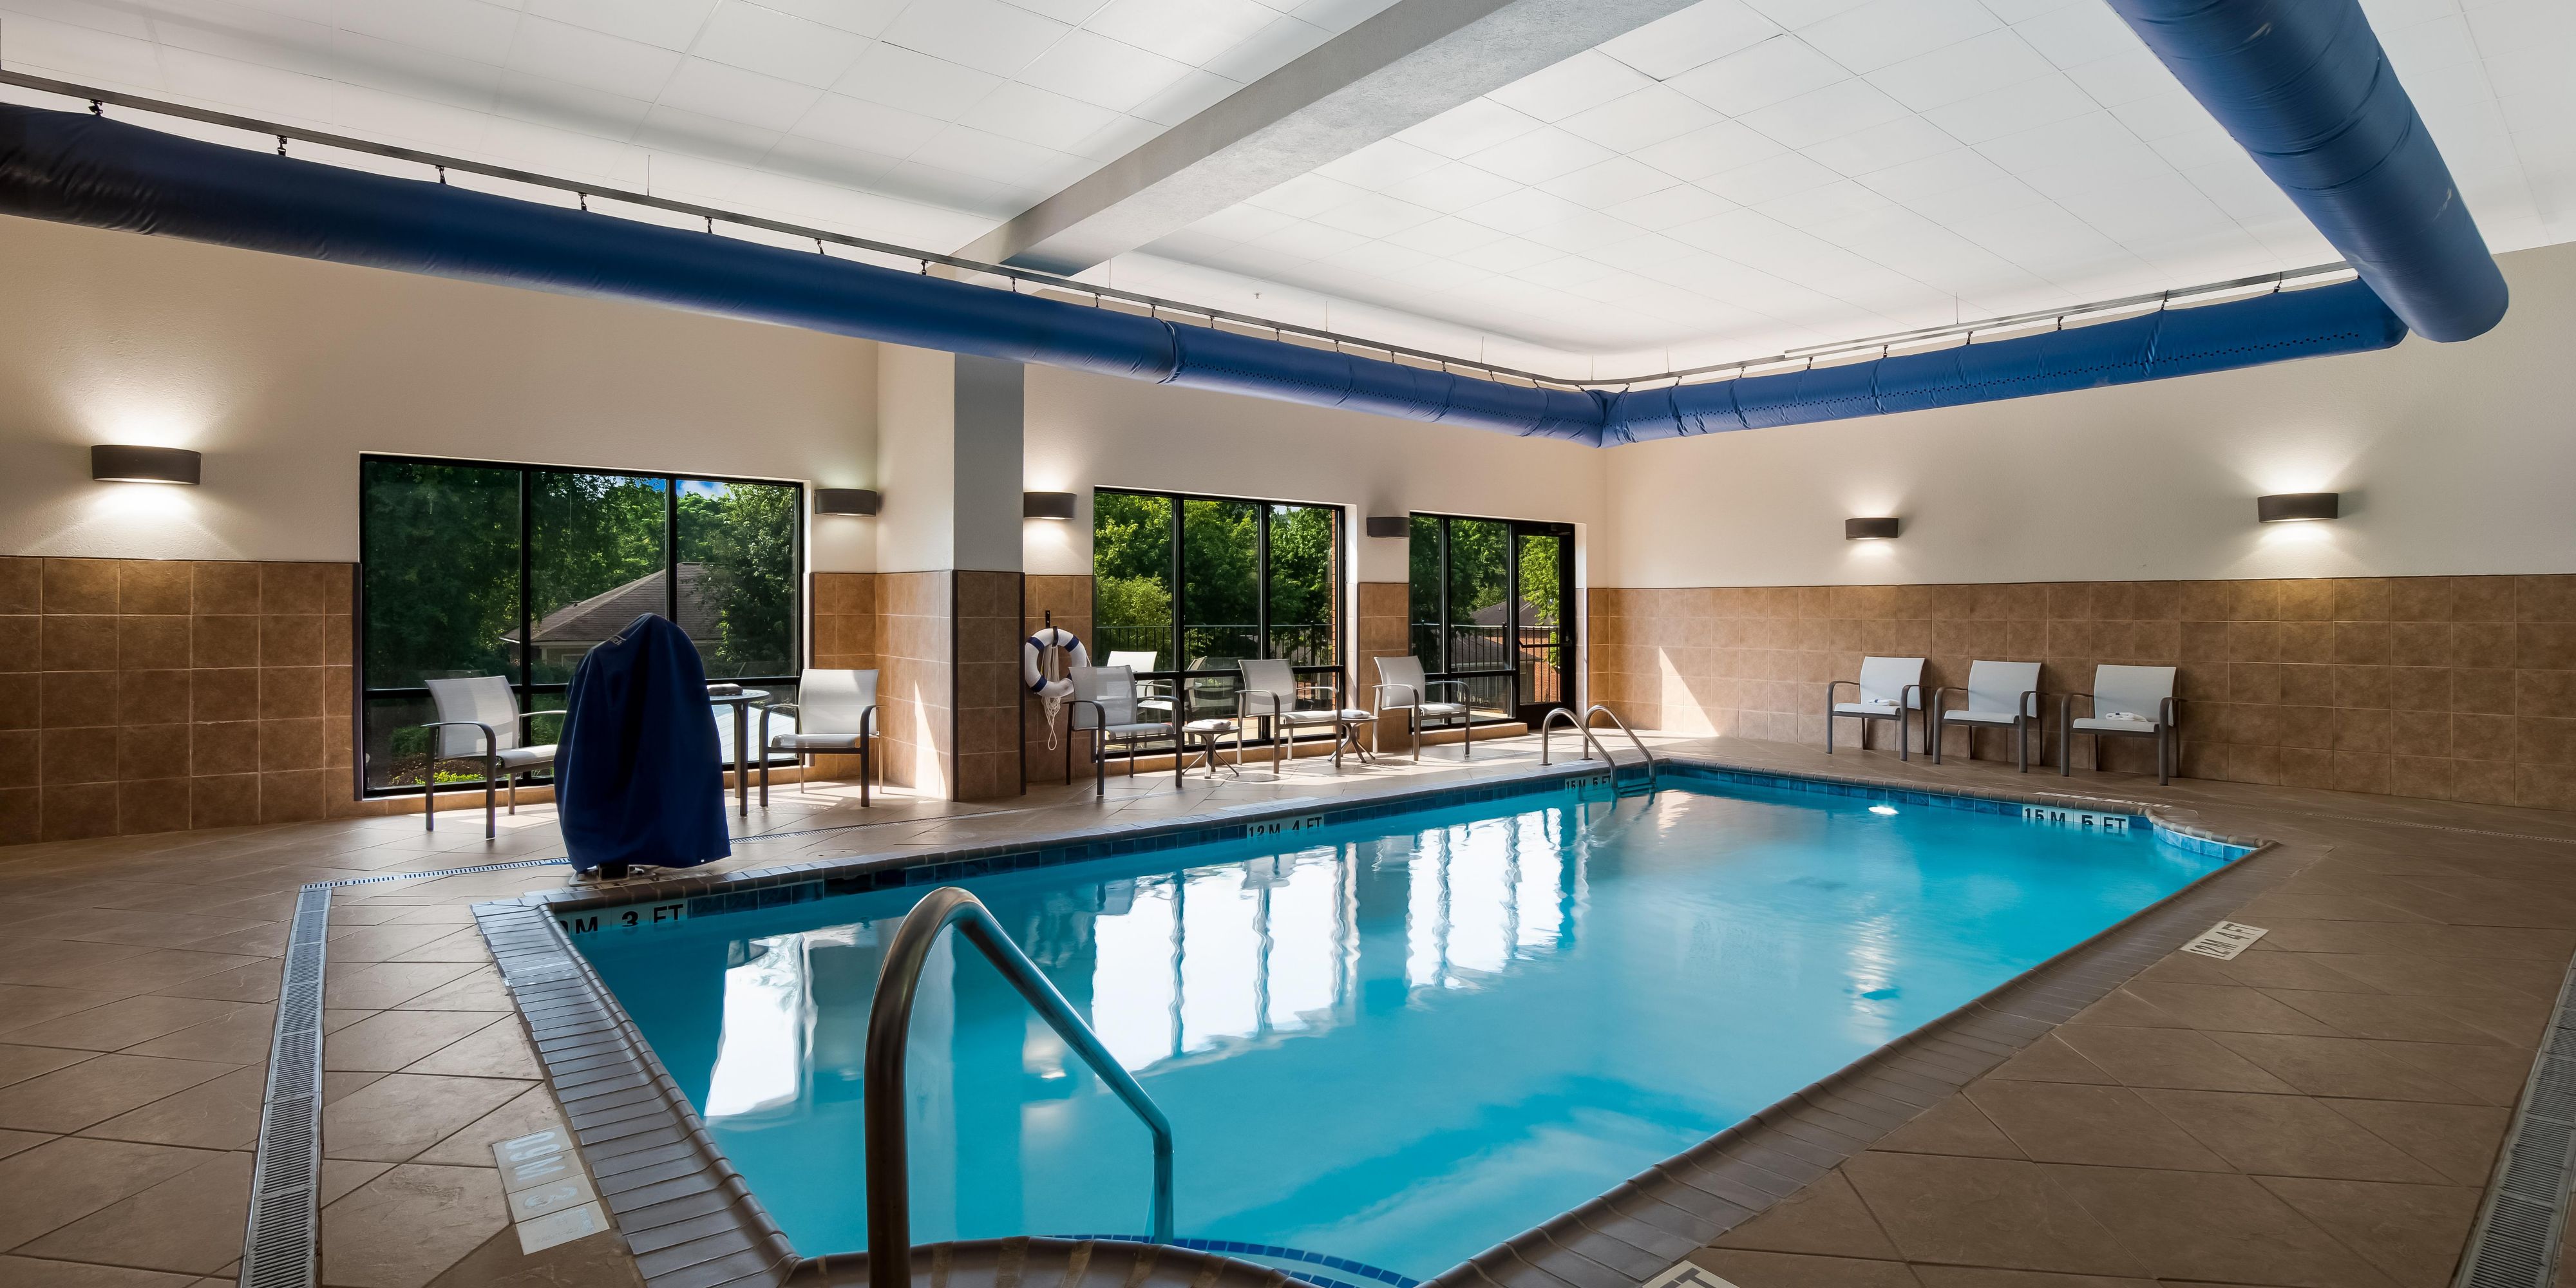 Escape the South Carolina heat with a dip in our indoor pool. We keep it at the perfect temperature no matter the season. Bring the kids down for an afternoon swim session. Start your morning with a refreshing glide through the water. Come down to the pool room anytime between 7:00 AM and 10:00 PM.